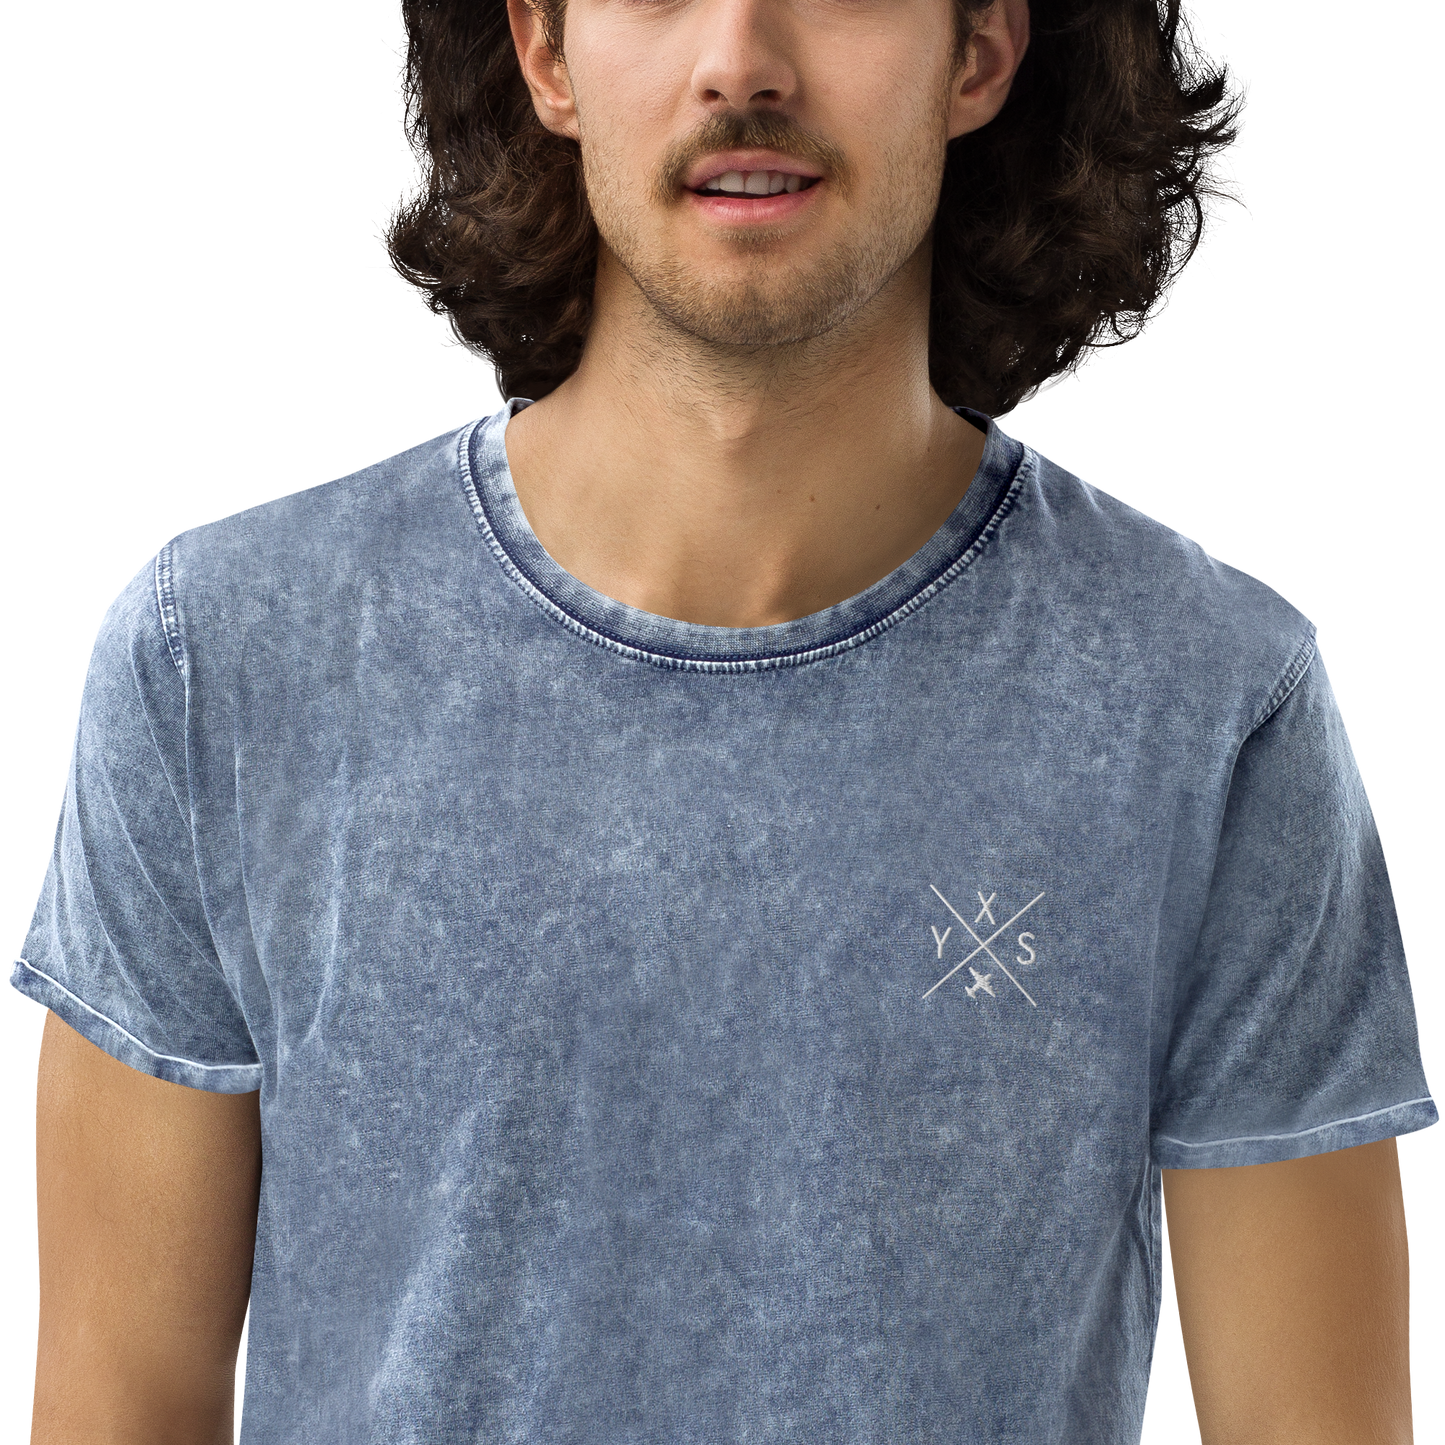 YHM Designs - YXS Prince George Denim T-Shirt - Crossed-X Design with Airport Code and Vintage Propliner - White Embroidery - Image 12